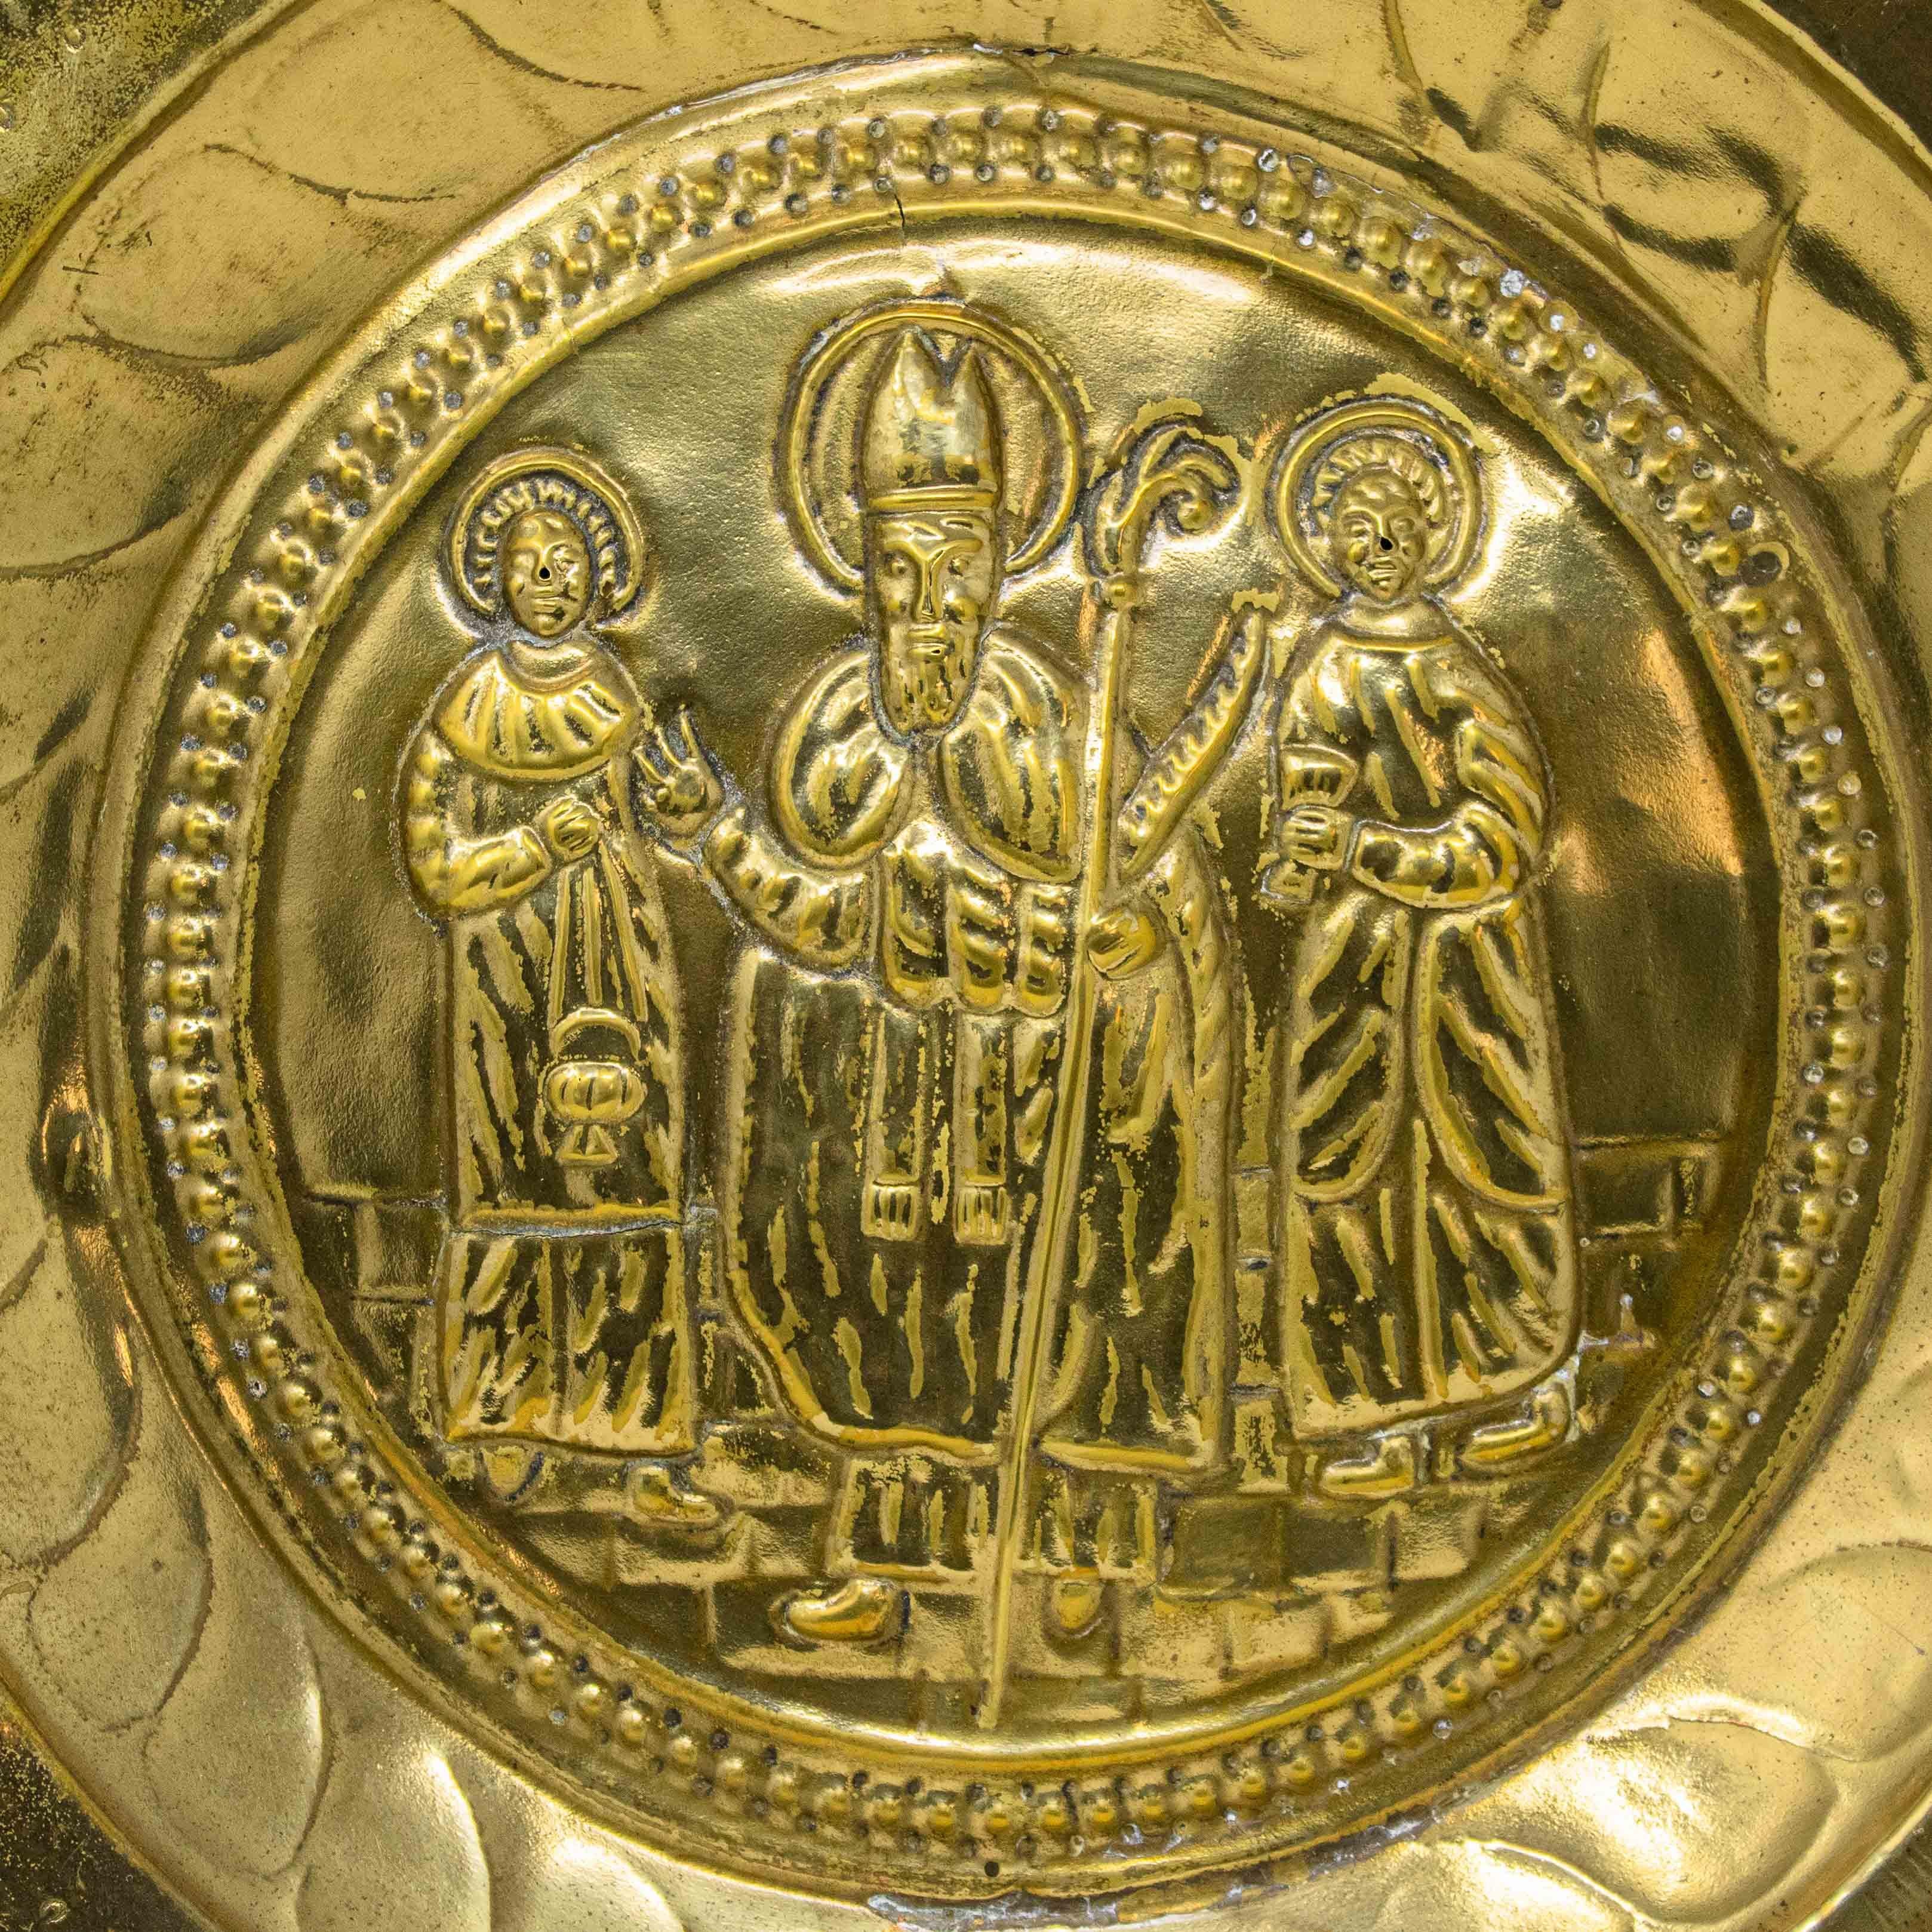 18th century
Almsgiver plate with saint
Brass, 46 cm diameter

The alms dish, properly called 